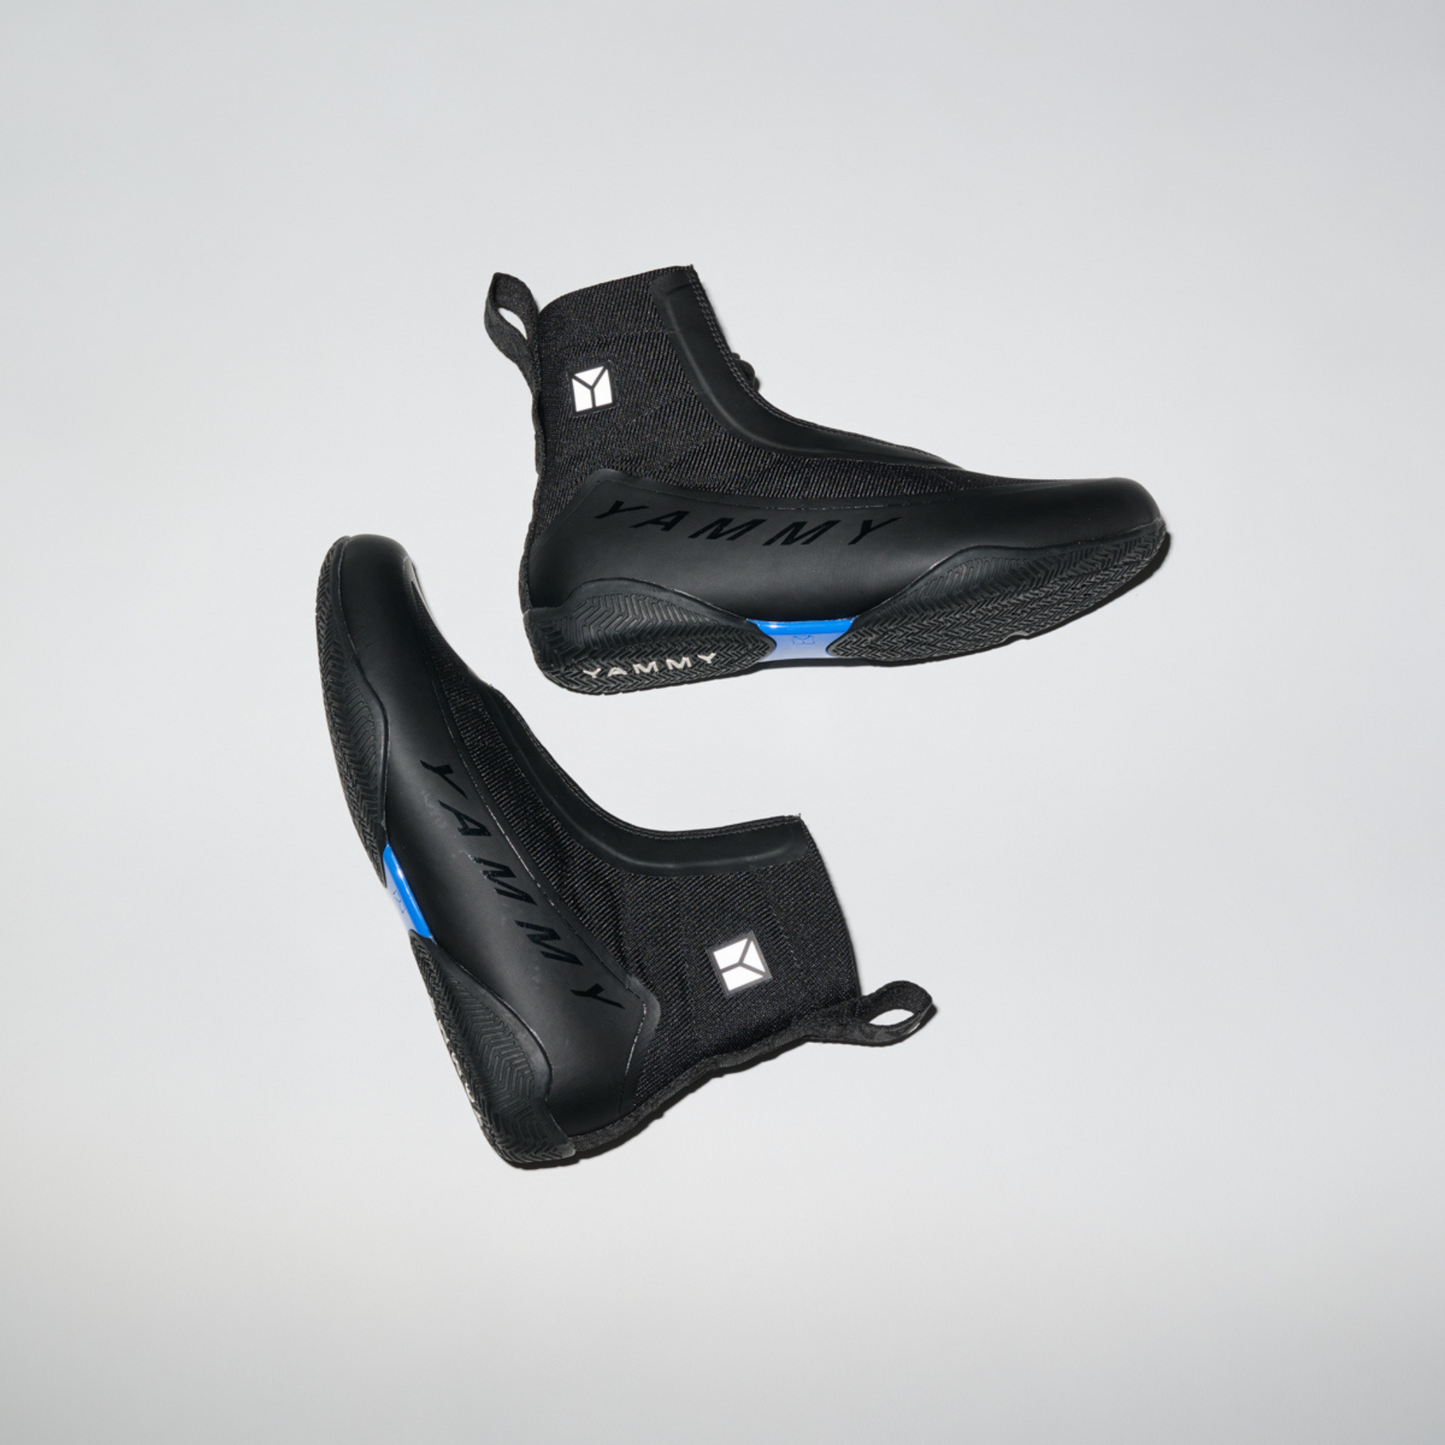 YAMMY Flux Mid Blackout boxing boots